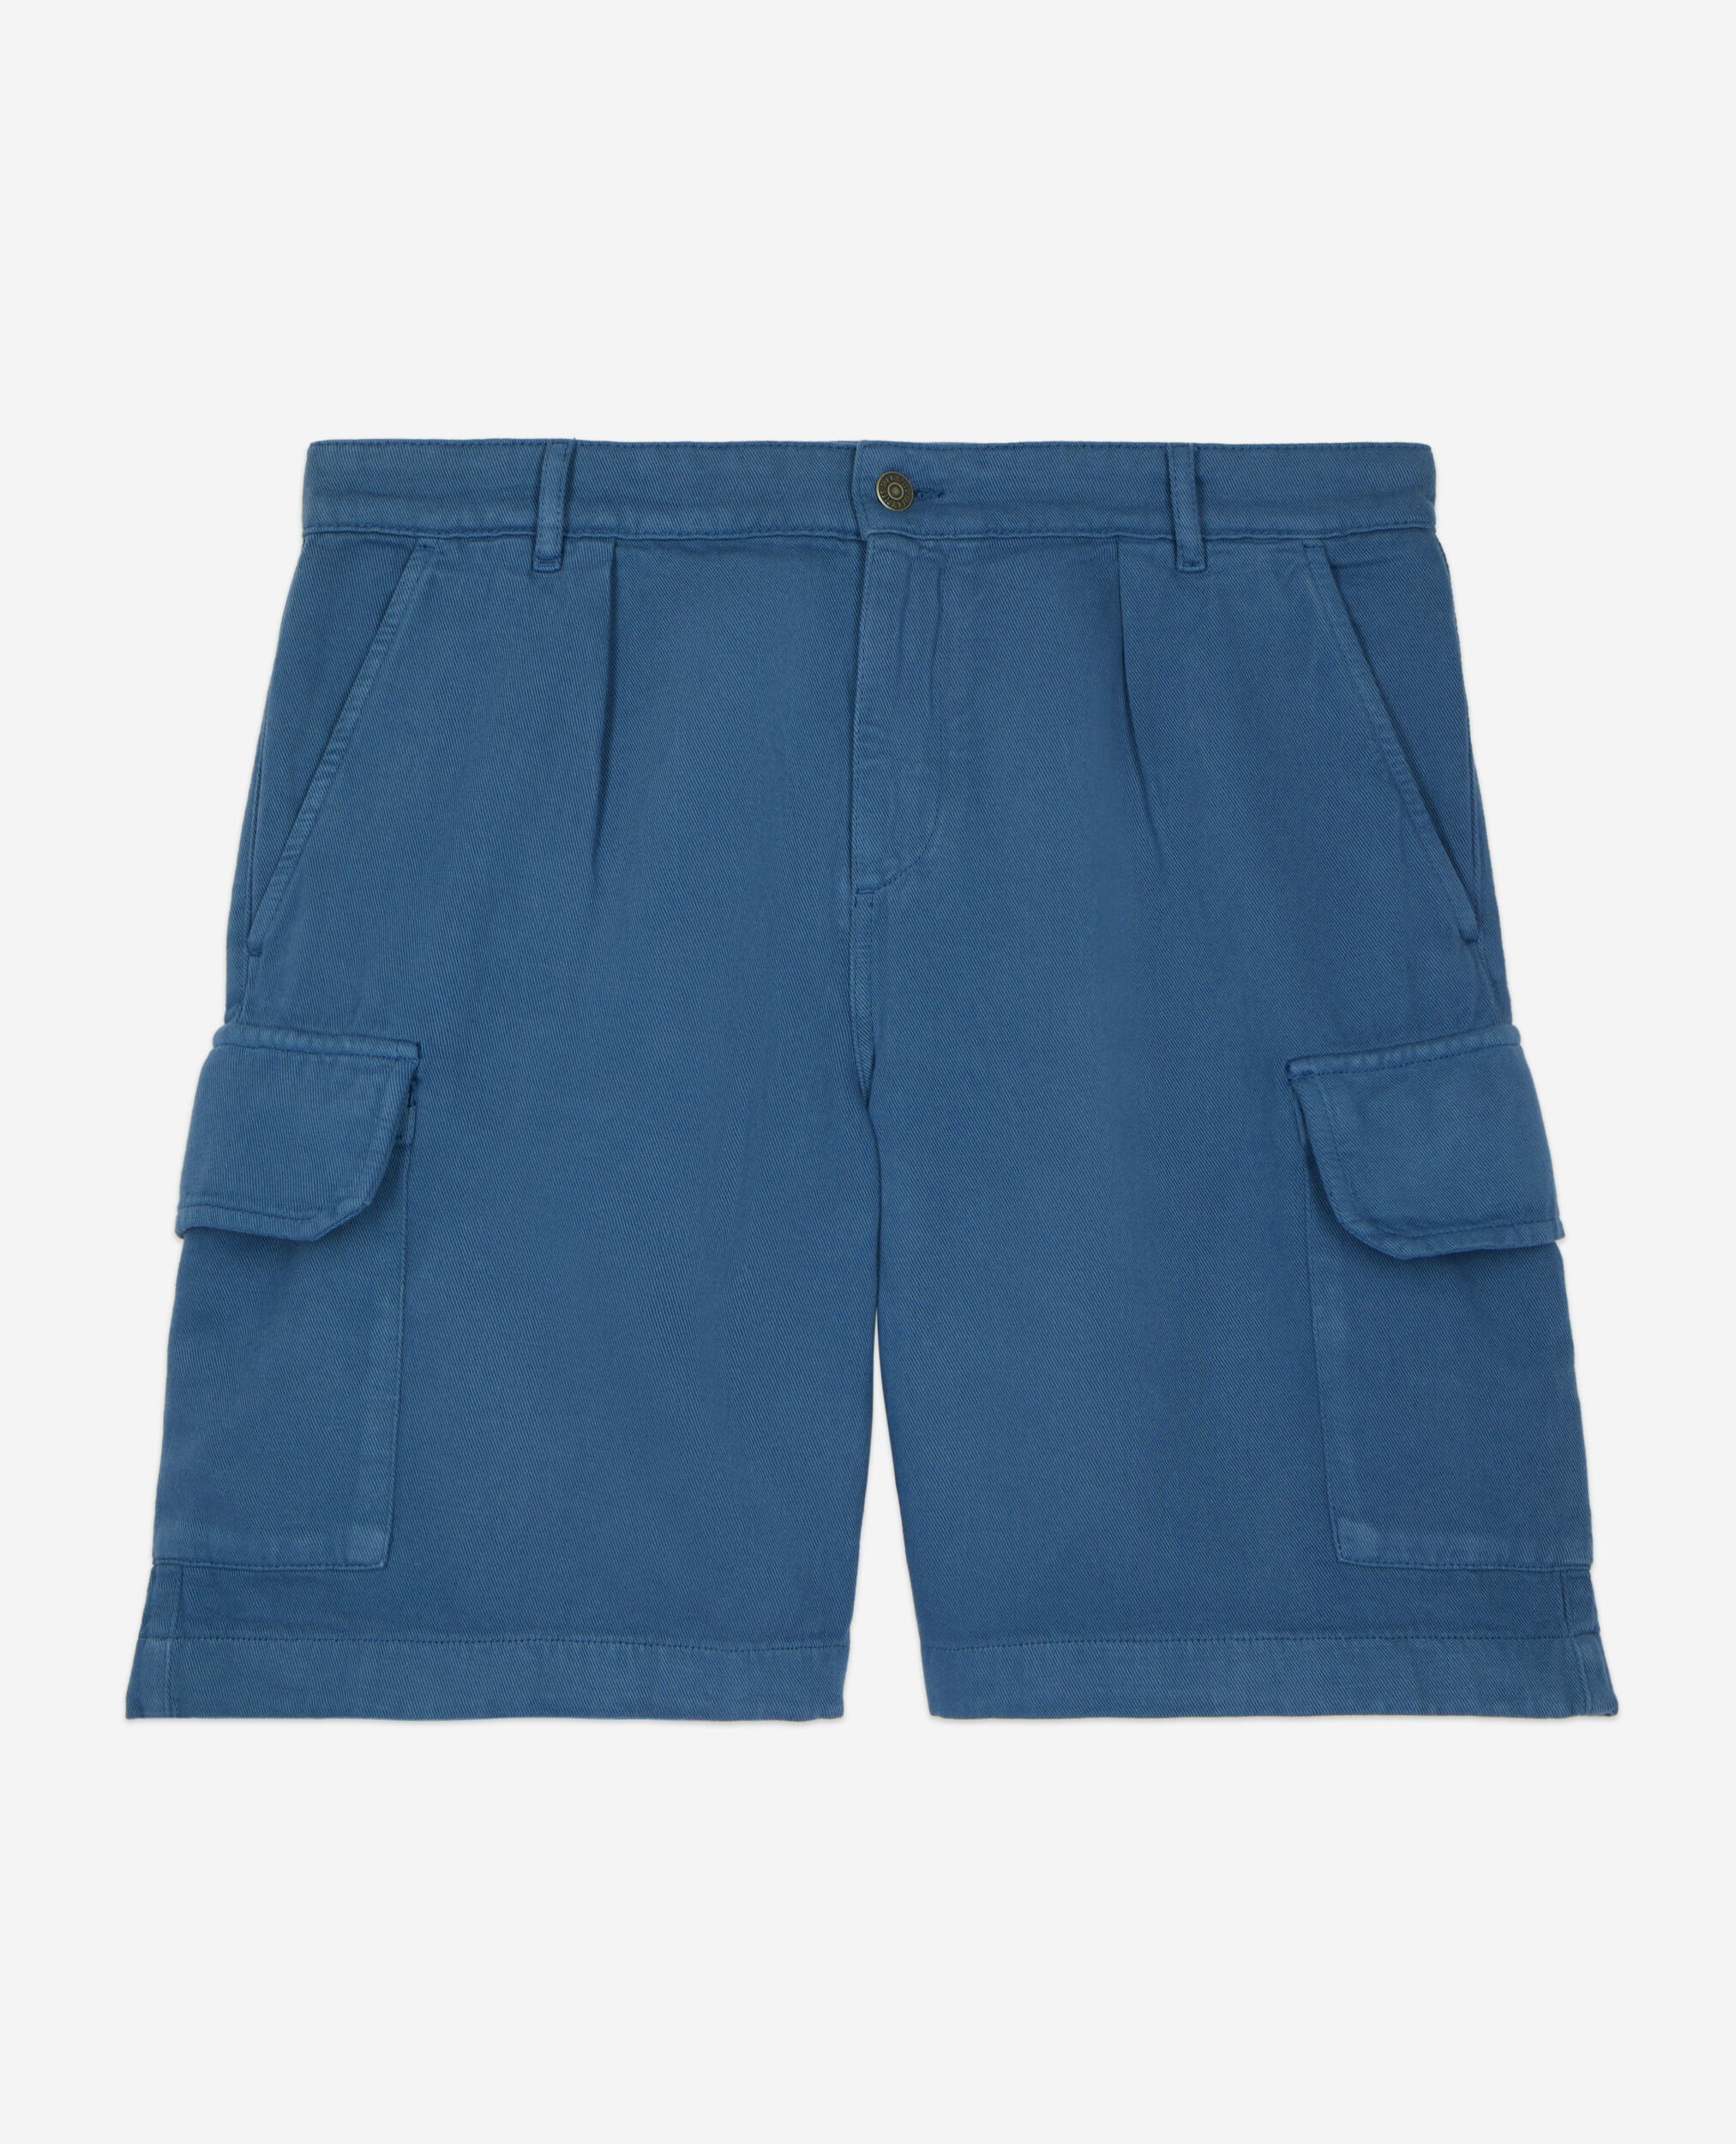 Blue cotton and linen cargo shorts, MIDDLE NAVY, hi-res image number null